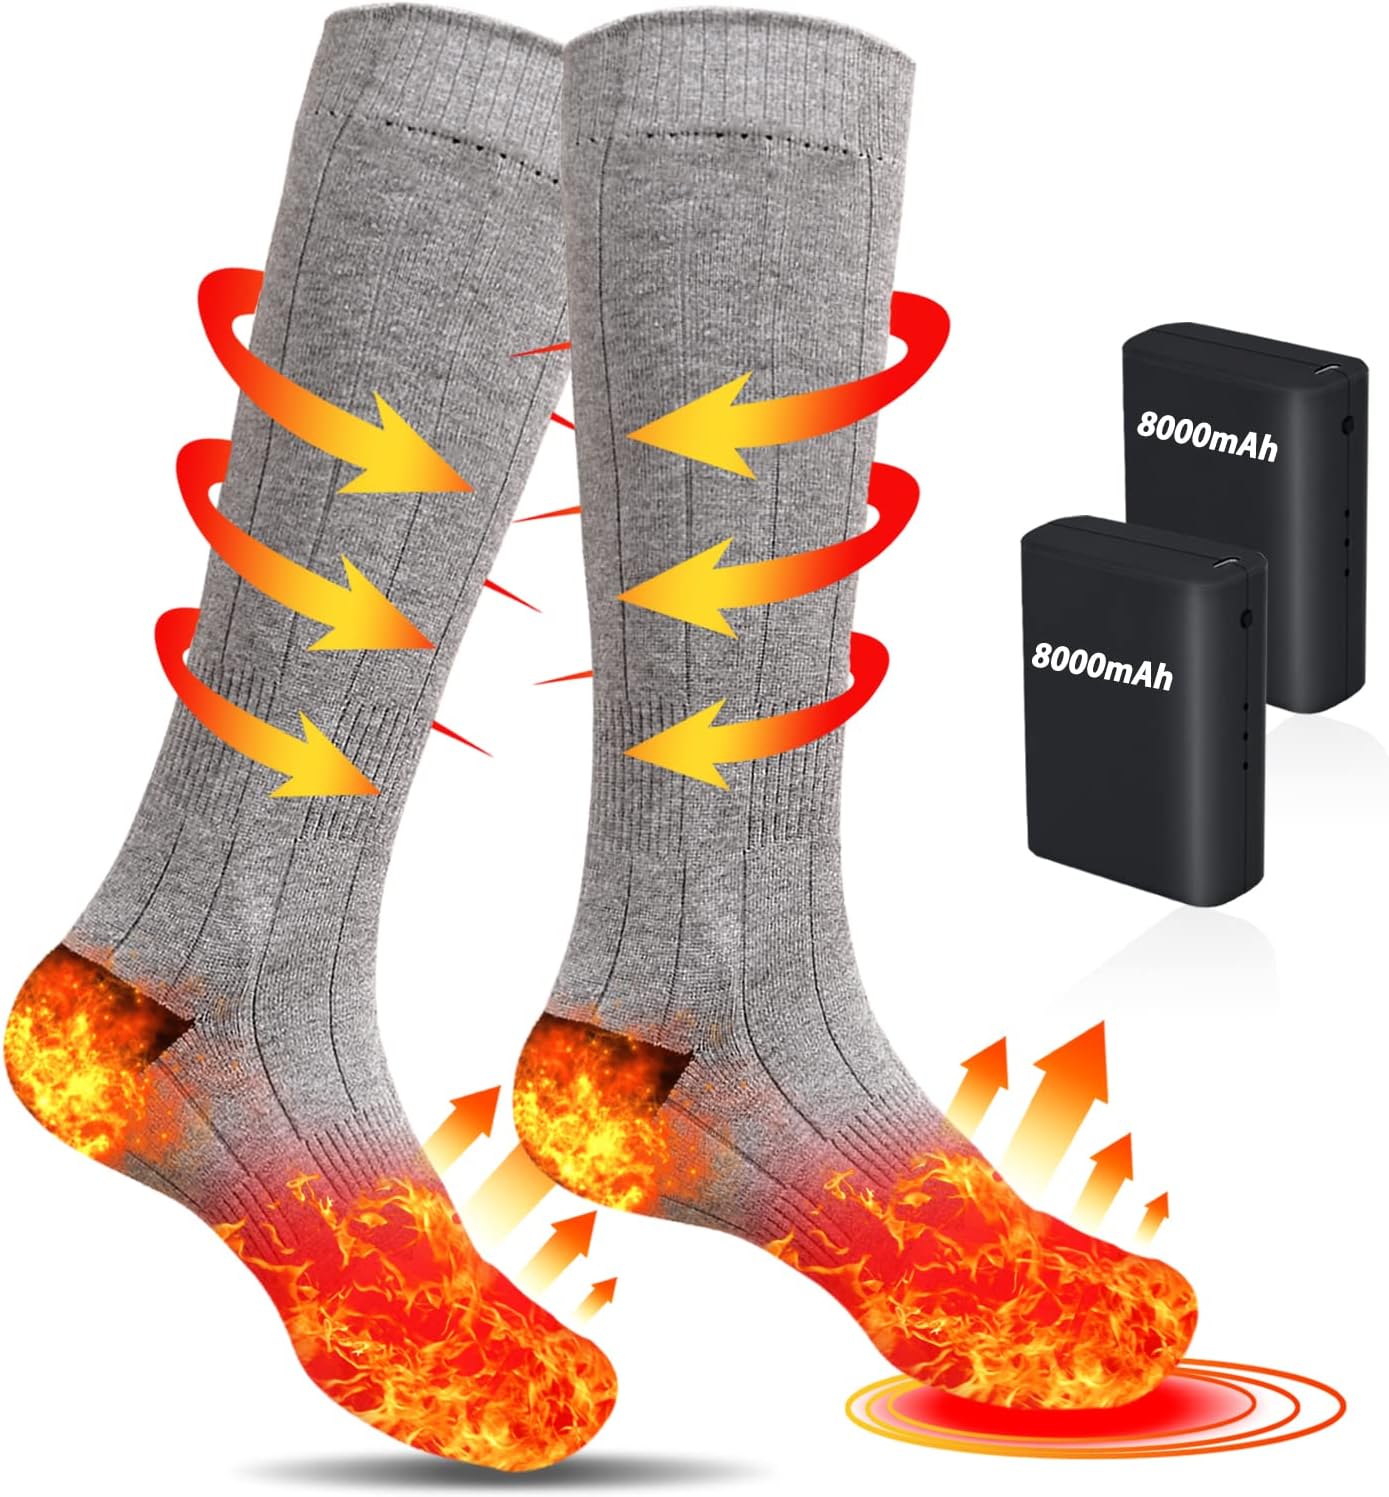 Heated Warm Socks USB Rechargeable Adjustable Temperature Heating Unisex Socks Warm Foot Equipment for Cycling Motorcycle Skiing